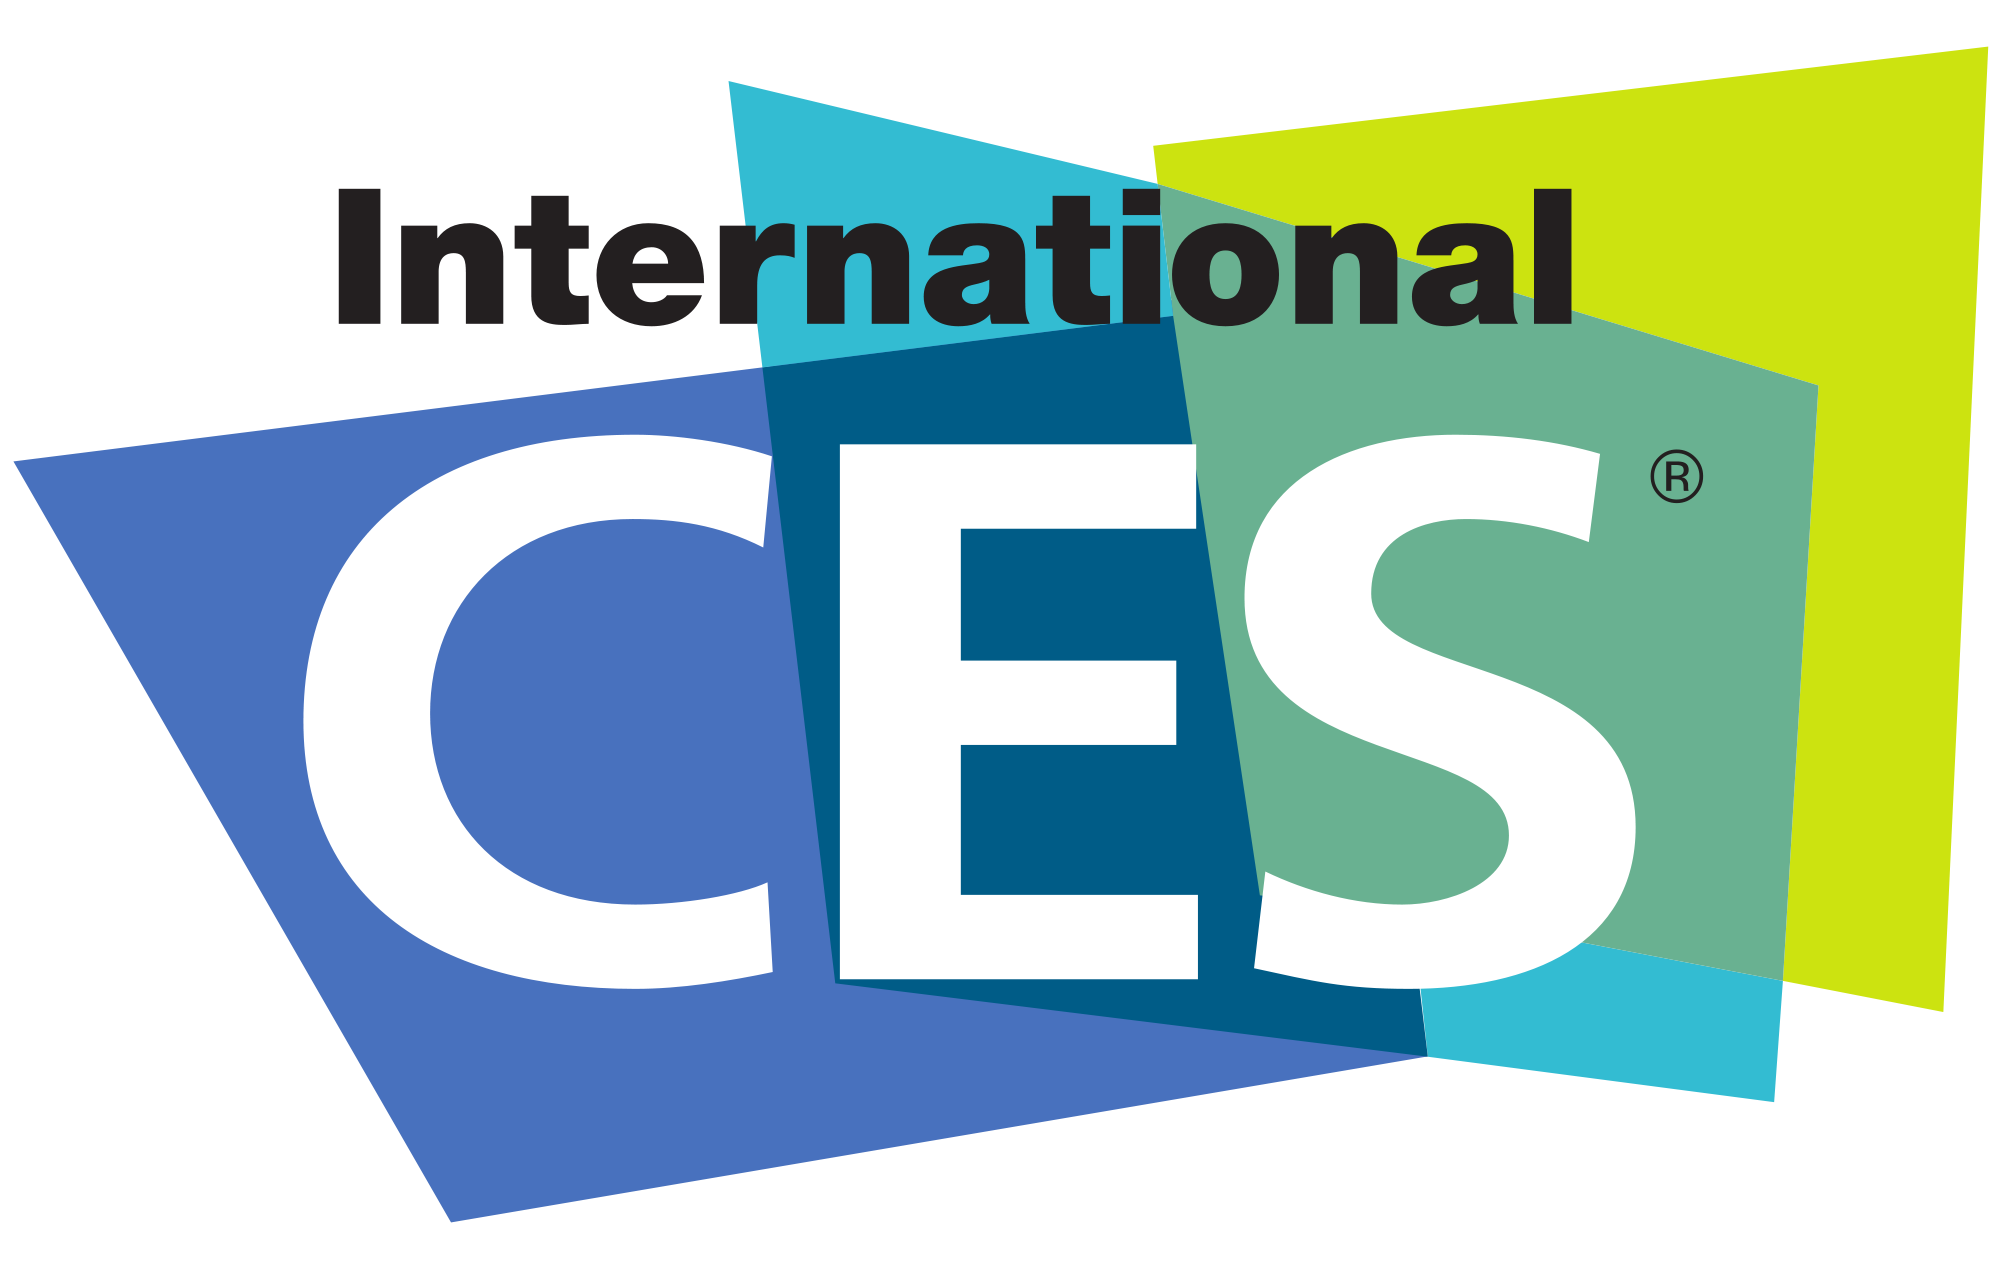 News $NEON – #Neonode Reports on a Successful Week at the 2016 CES in Las Vegas